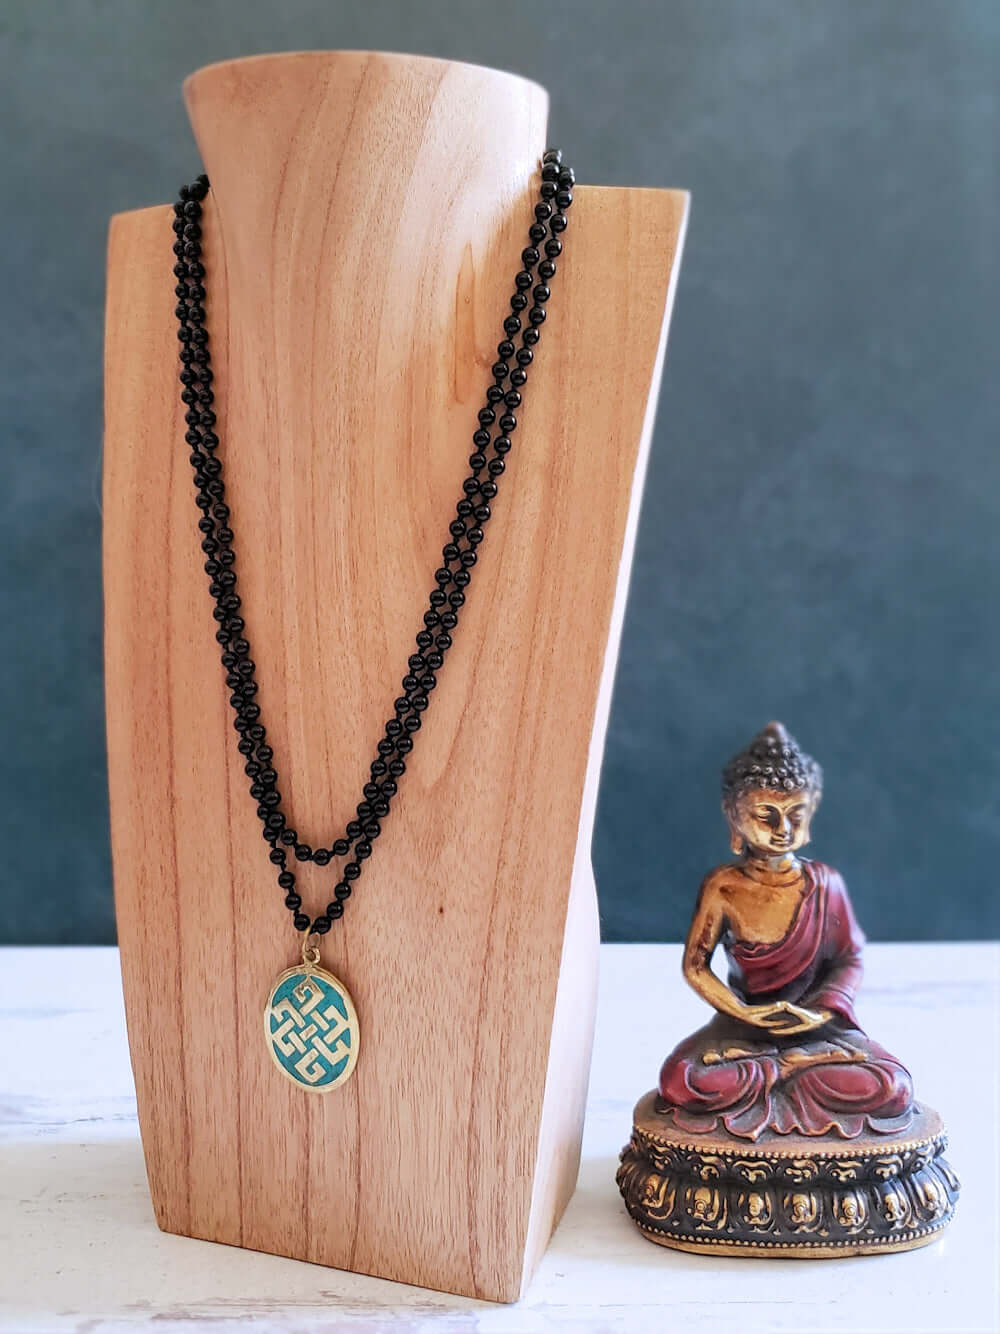 Zen Shakti Collection - Yoga and Meditation inspired jewelry